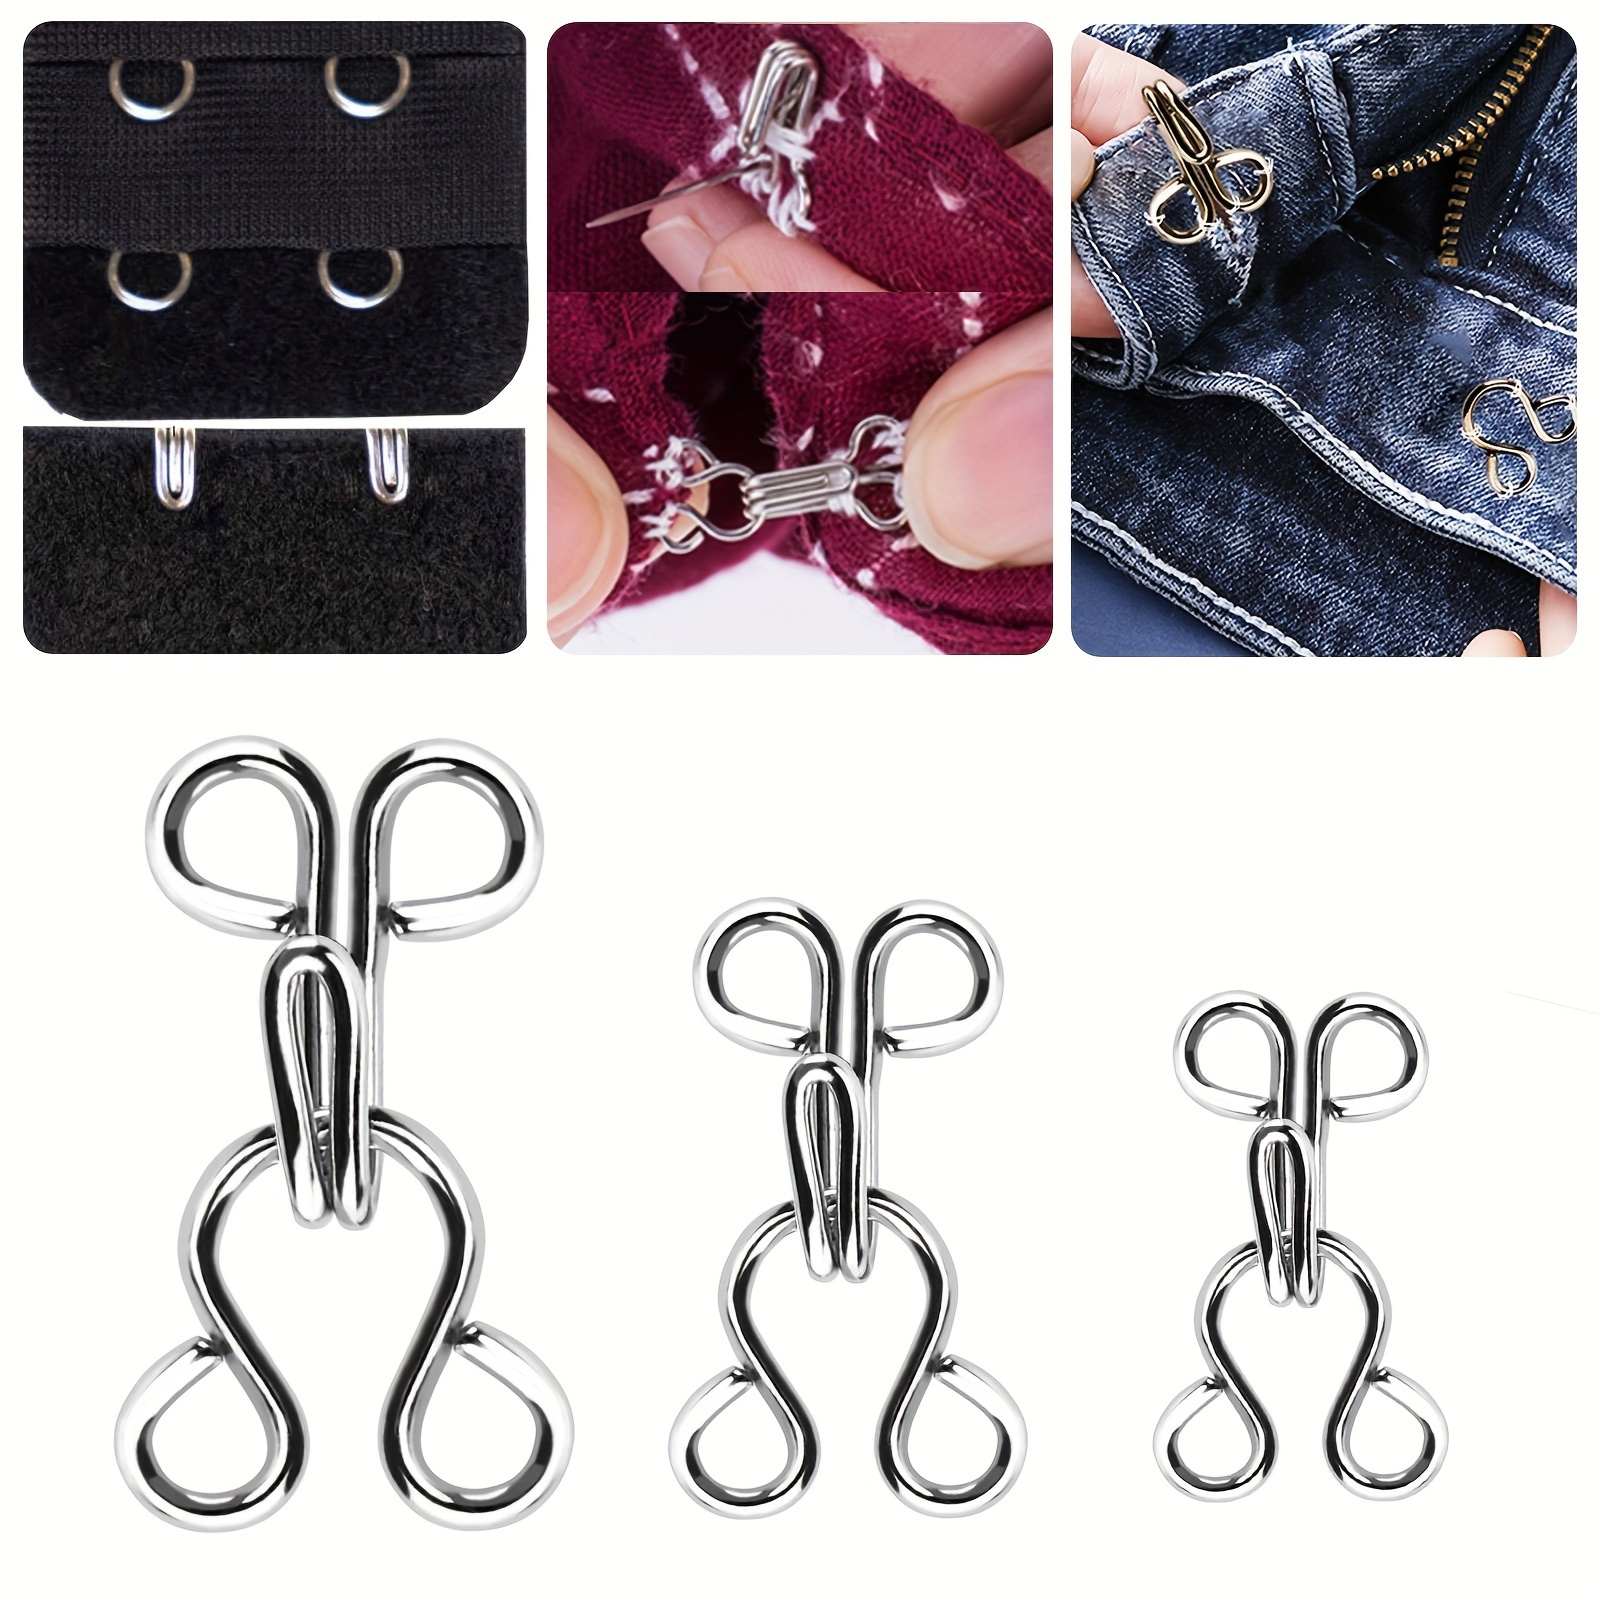 KACOLA 60 Set Sewing Hook and Eye Latch for Clothing, Bra Hooks  Replacement, Large Hooks and Eyes Clasps for Clothing, Sewing DIY Craft, 3  Sizes 23/17/12.5mm, Black and Silver